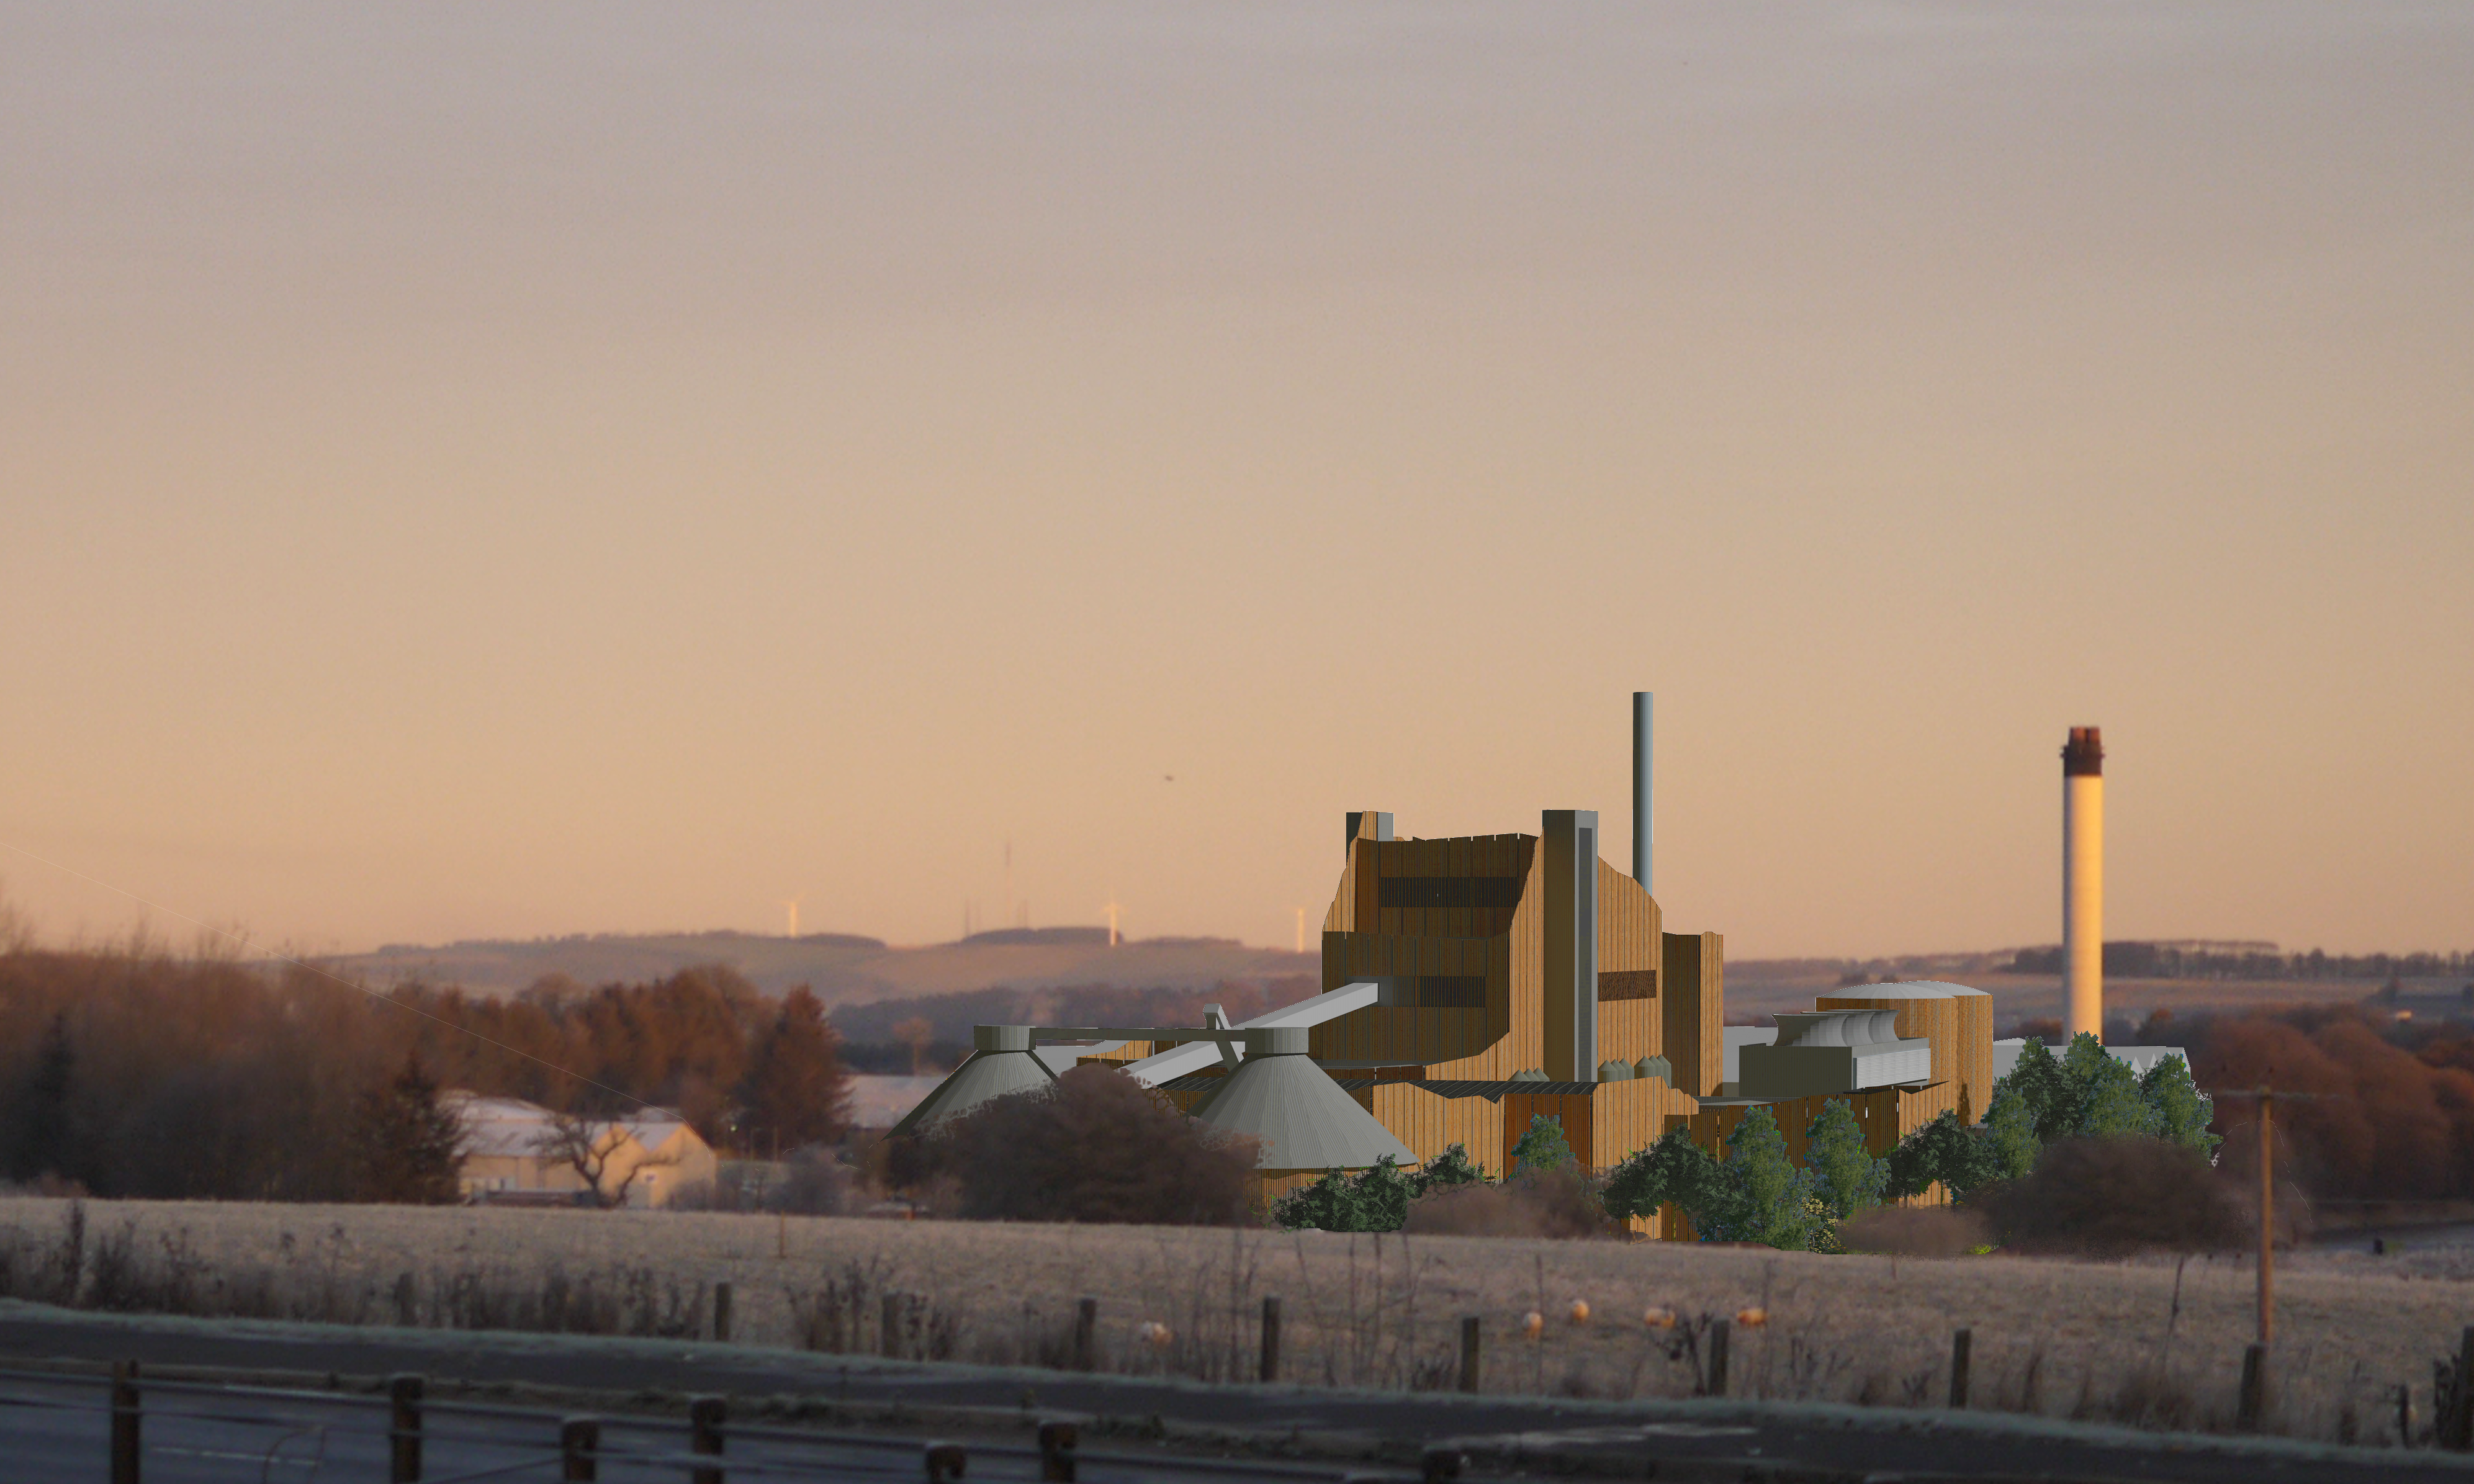 An artist’s impression of the proposed waste incinerator at Thainstone. View from the A96 Aberdeen to Inverness road.